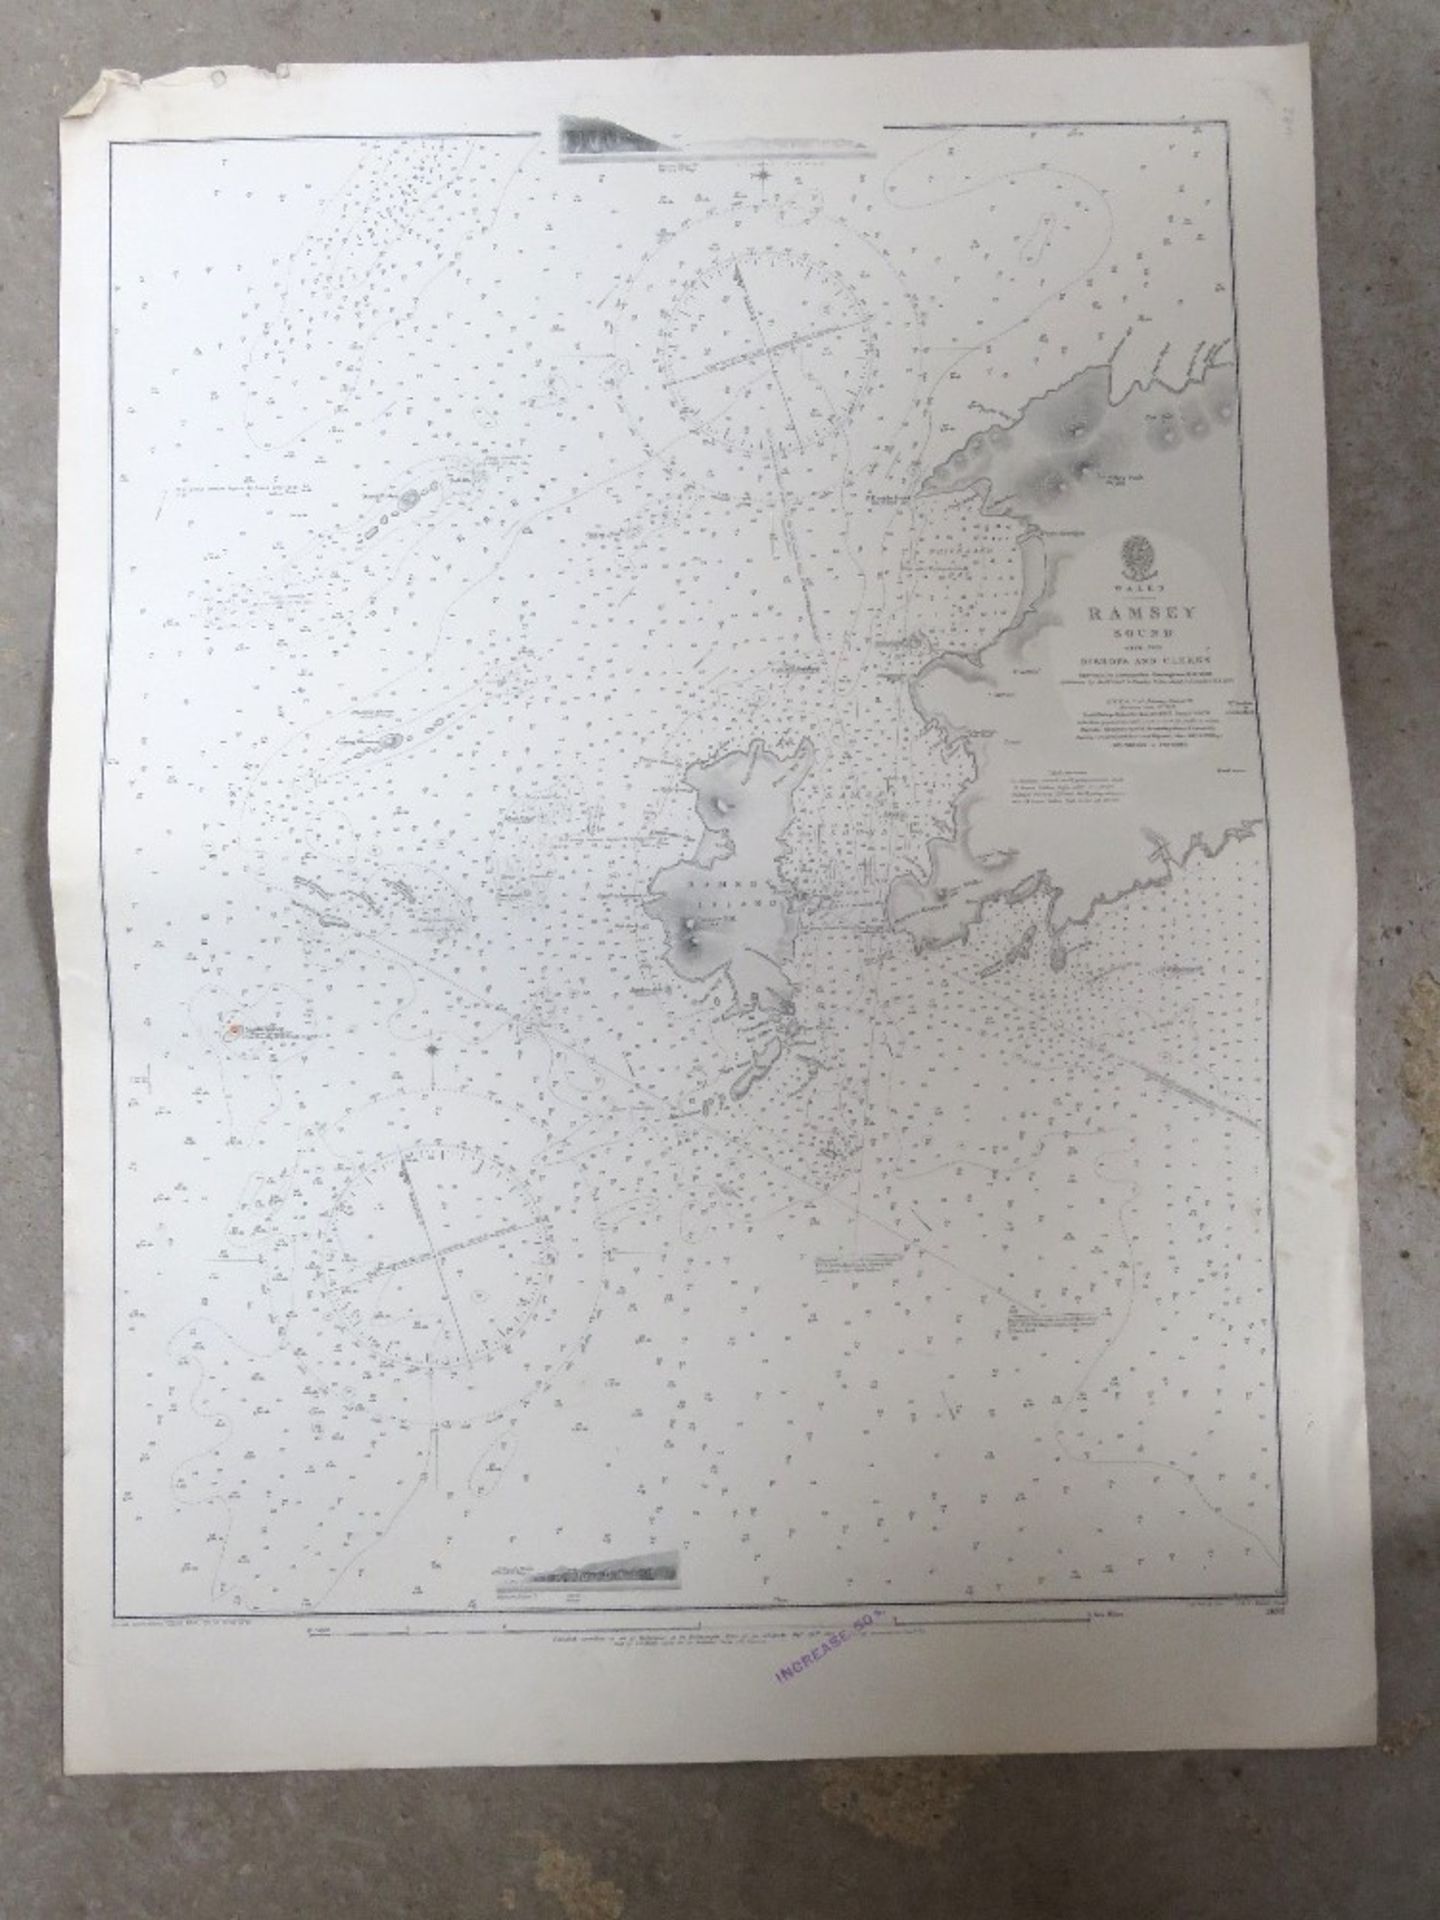 A Naval chart of Ramsey Sound surveyed by Commander Sherringham and printed by J & C Walker.